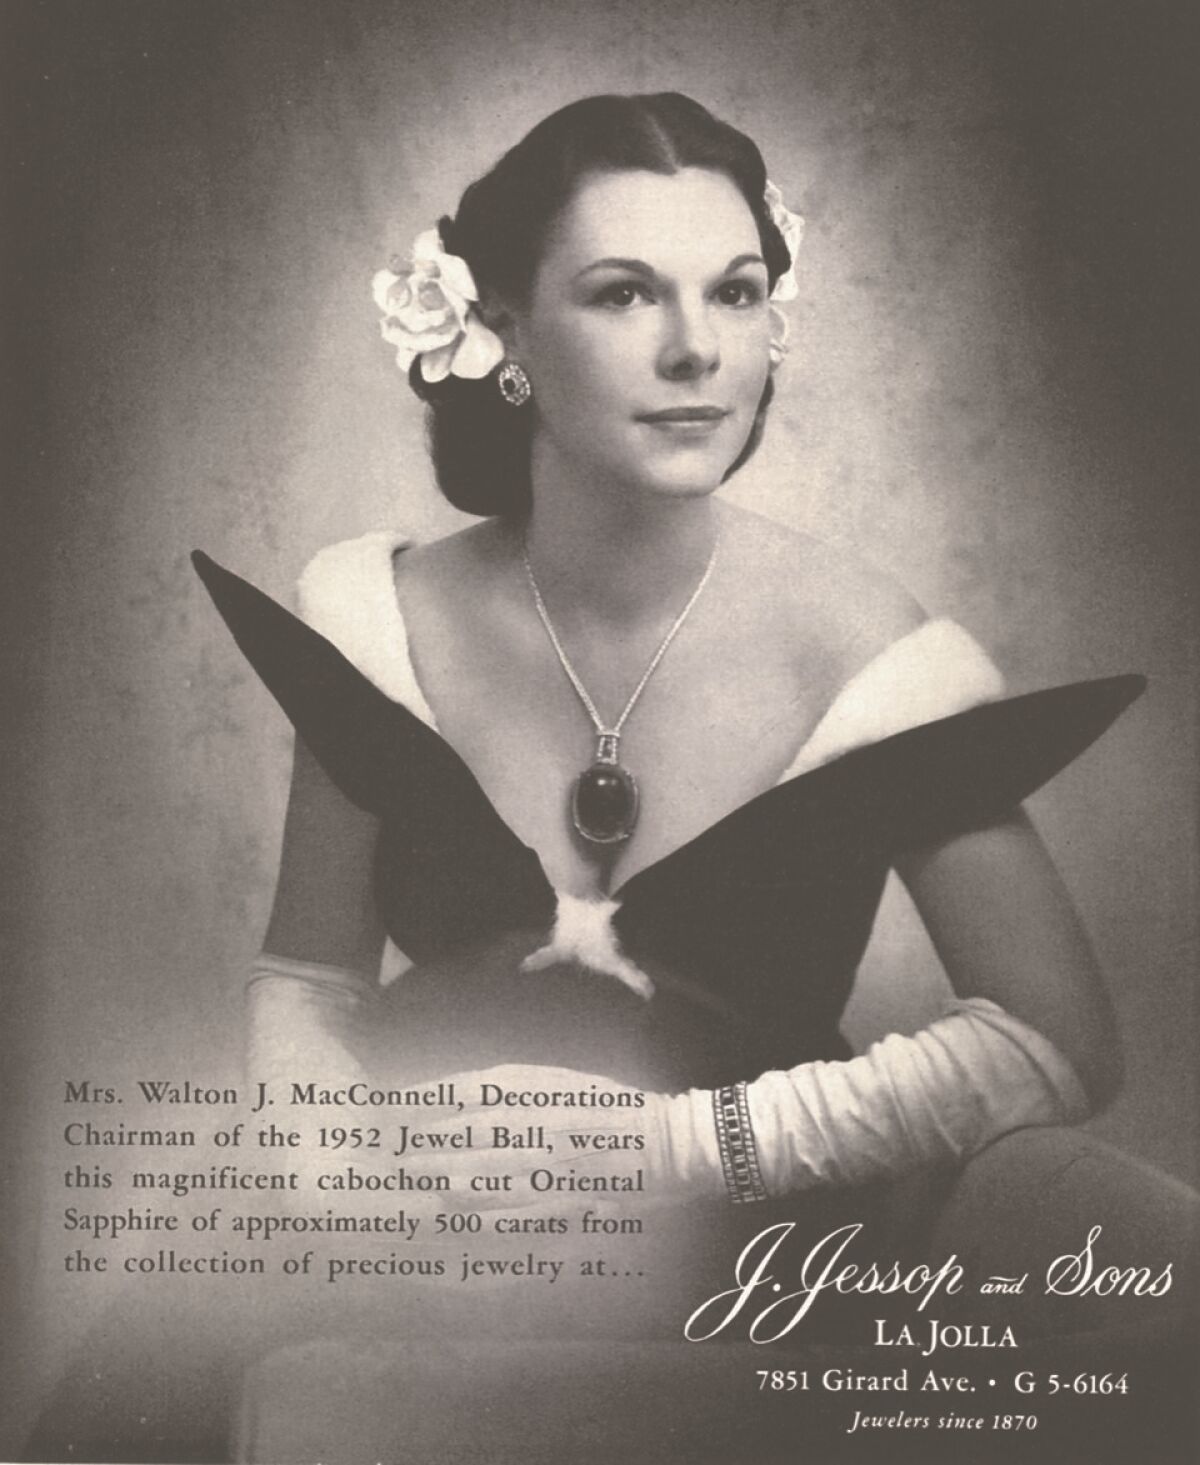 Las Patronas founding member Josephine MacConnell is pictured in an advertisement in a Jewel Ball booklet.